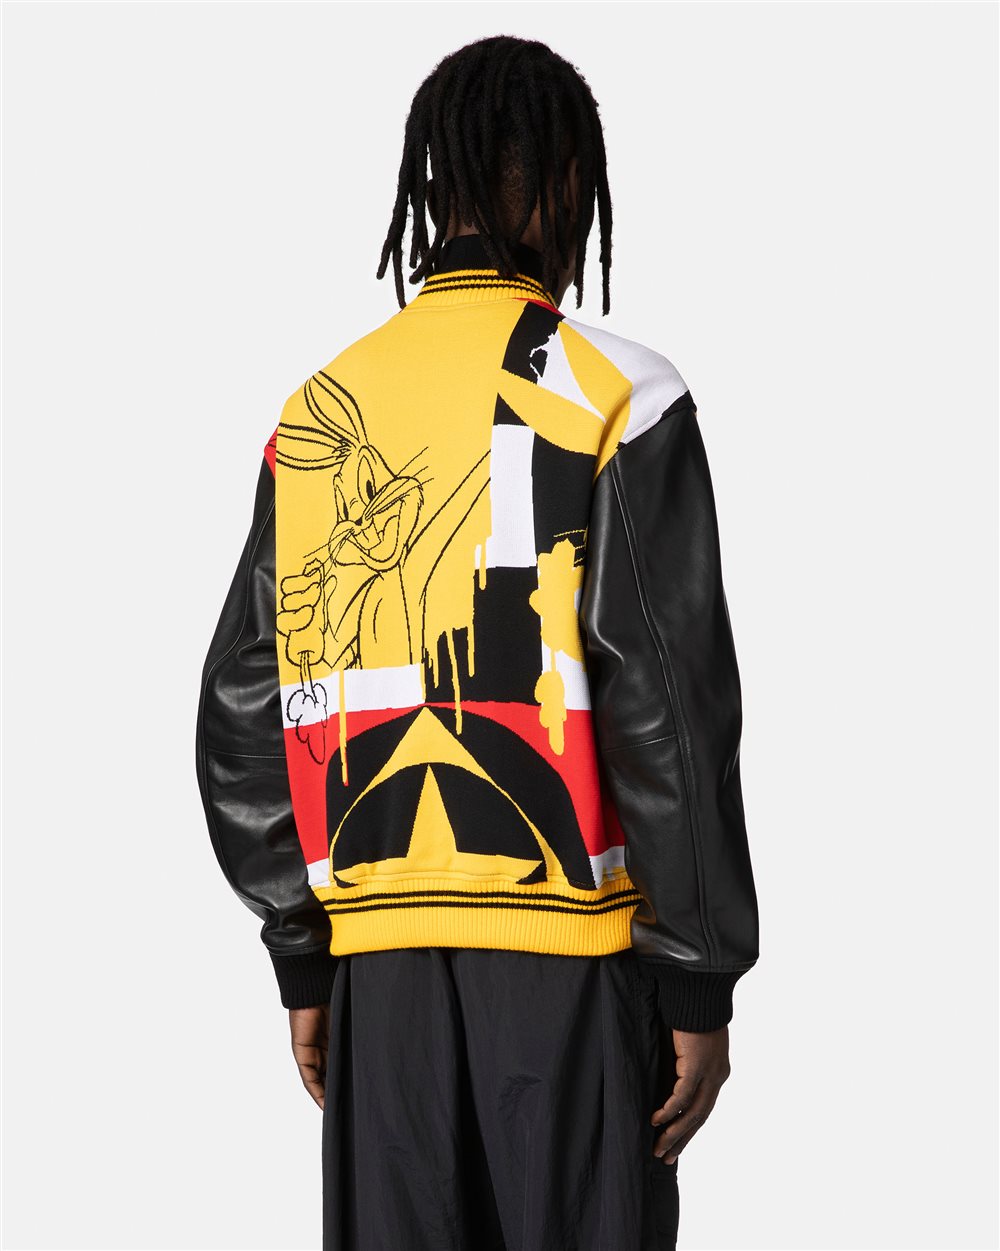 Bomber jacket with cartoon details and logo - Iceberg - Official Website